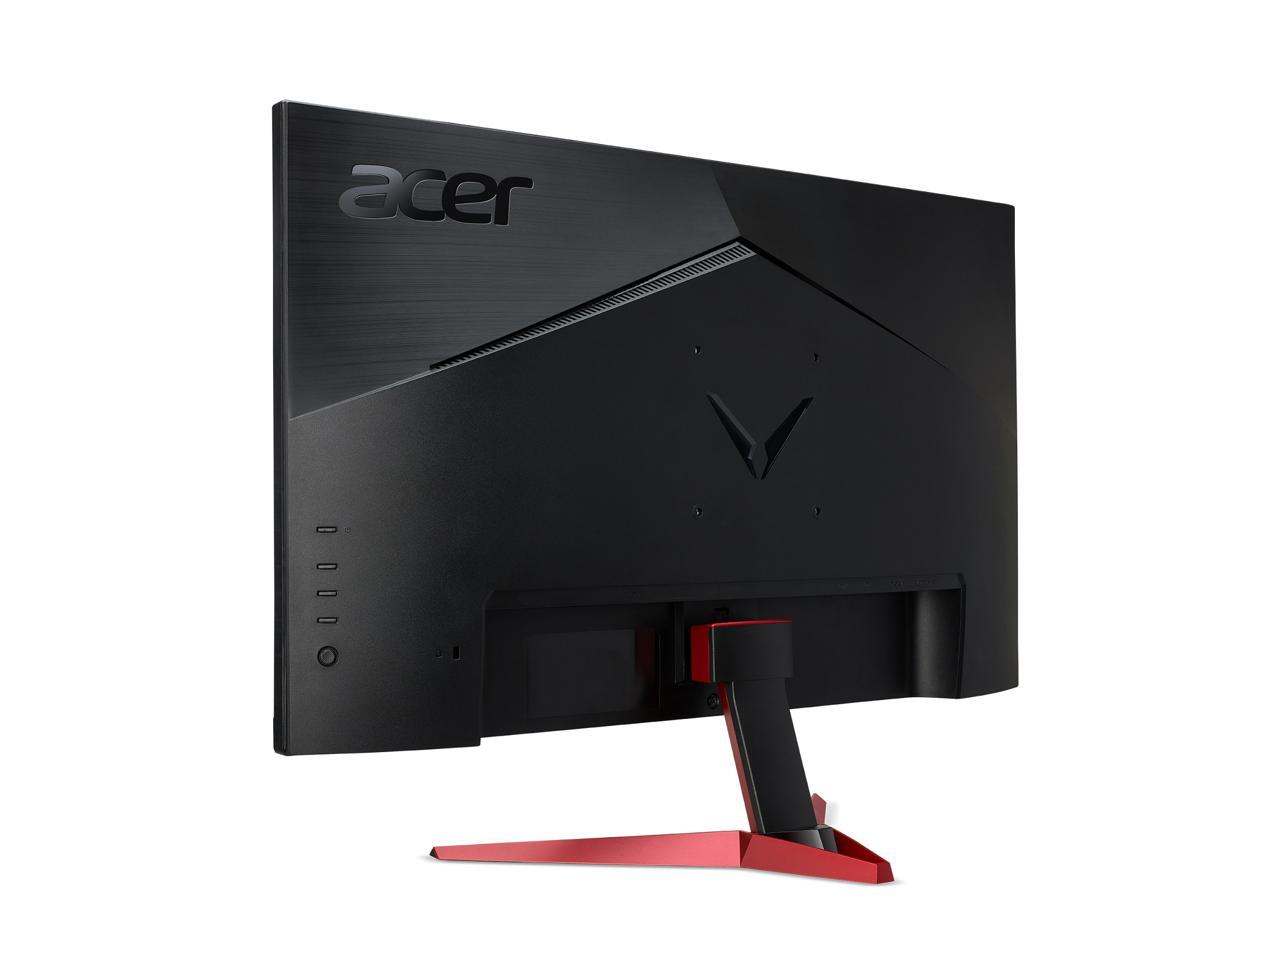 Acer Nitro VG252Q XBMIIPX 24.5" IPS 1920x1080 Full HD G Sync Compatible / AMD FreeSync Premium up to 0.5ms 240Hz VESA HDR400 Gaming Monitor, HDMIx2, DisplayPort, Speakers